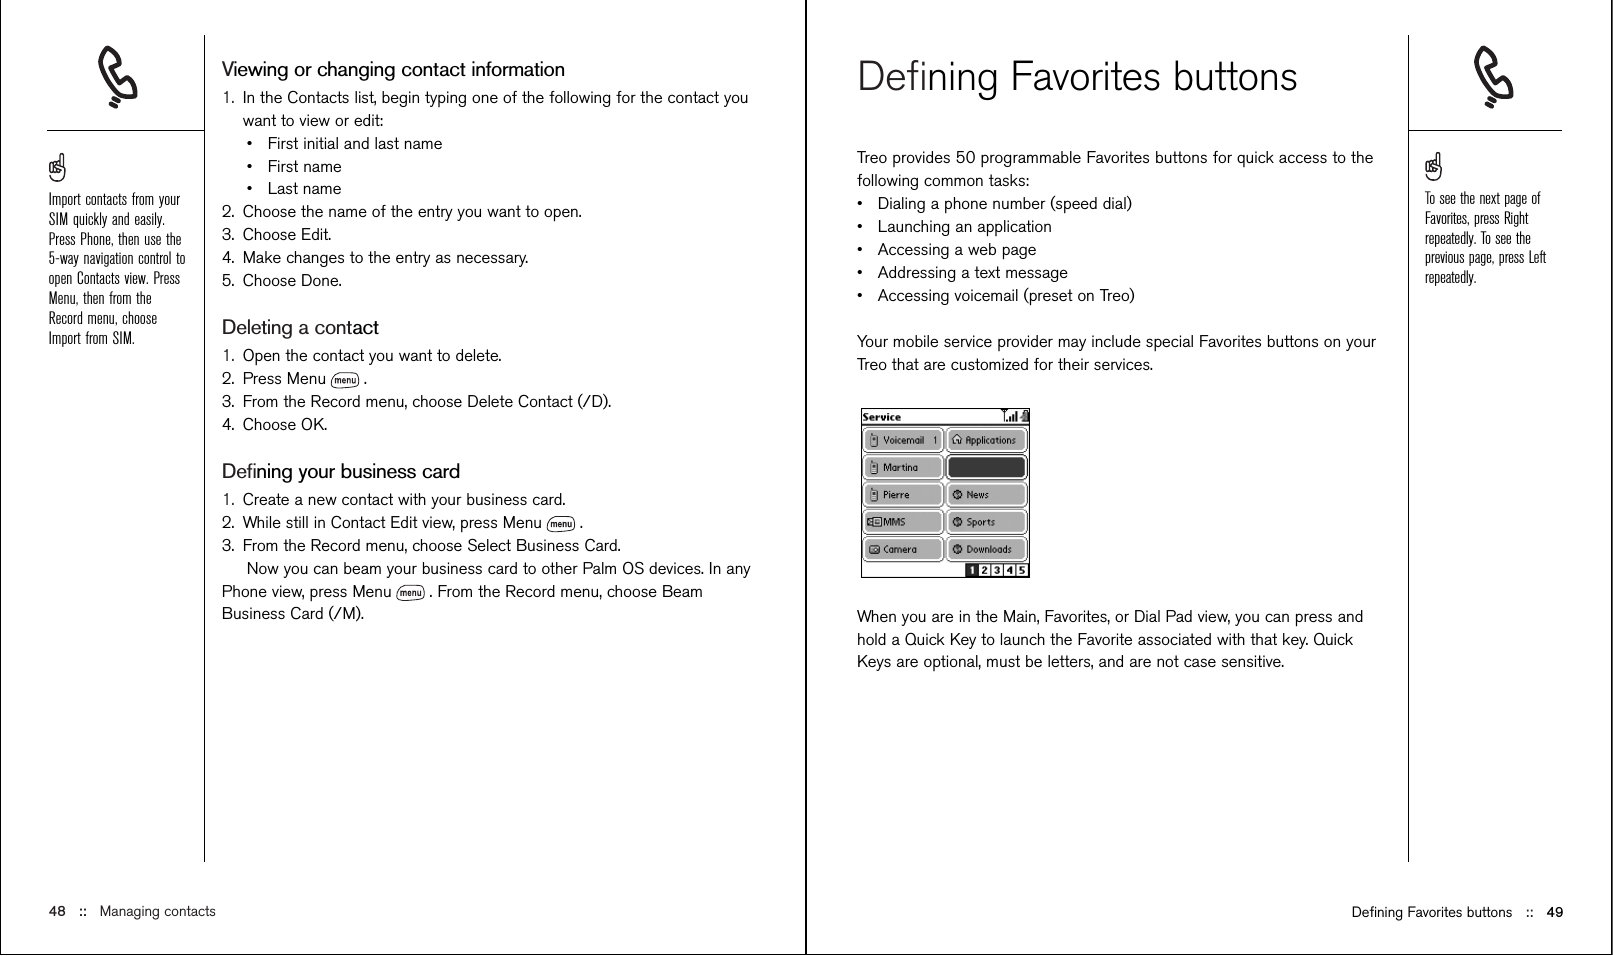 Deﬁning Favorites buttonsTreo provides 50 programmable Favorites buttons for quick access to thefollowing common tasks: •Dialing a phone number (speed dial)•Launching an application•Accessing a web page•Addressing a text message•Accessing voicemail (preset on Treo)Your mobile service provider may include special Favorites buttons on yourTreo that are customized for their services.When you are in the Main, Favorites, or Dial Pad view, you can press andhold a Quick Key to launch the Favorite associated with that key. QuickKeys are optional, must be letters, and are not case sensitive. Viewing or changing contact information1. In the Contacts list, begin typing one of the following for the contact youwant to view or edit:•First initial and last name•First name•Last name2. Choose the name of the entry you want to open.3. Choose Edit.4. Make changes to the entry as necessary.5. Choose Done.Deleting a contact1. Open the contact you want to delete.2. Press Menu .3. From the Record menu, choose Delete Contact (/D).4. Choose OK. Deﬁning your business card1. Create a new contact with your business card.2. While still in Contact Edit view, press Menu .3. From the Record menu, choose Select Business Card.Now you can beam your business card to other Palm OS devices. In anyPhone view, press Menu . From the Record menu, choose BeamBusiness Card (/M).48 ::   Managing contacts Deﬁning Favorites buttons ::   49To see the next page ofFavorites, press Rightrepeatedly. To see theprevious page, press Leftrepeatedly.Import contacts from yourSIM quickly and easily.Press Phone, then use the5-way navigation control toopen Contacts view. PressMenu, then from theRecord menu, chooseImport from SIM.